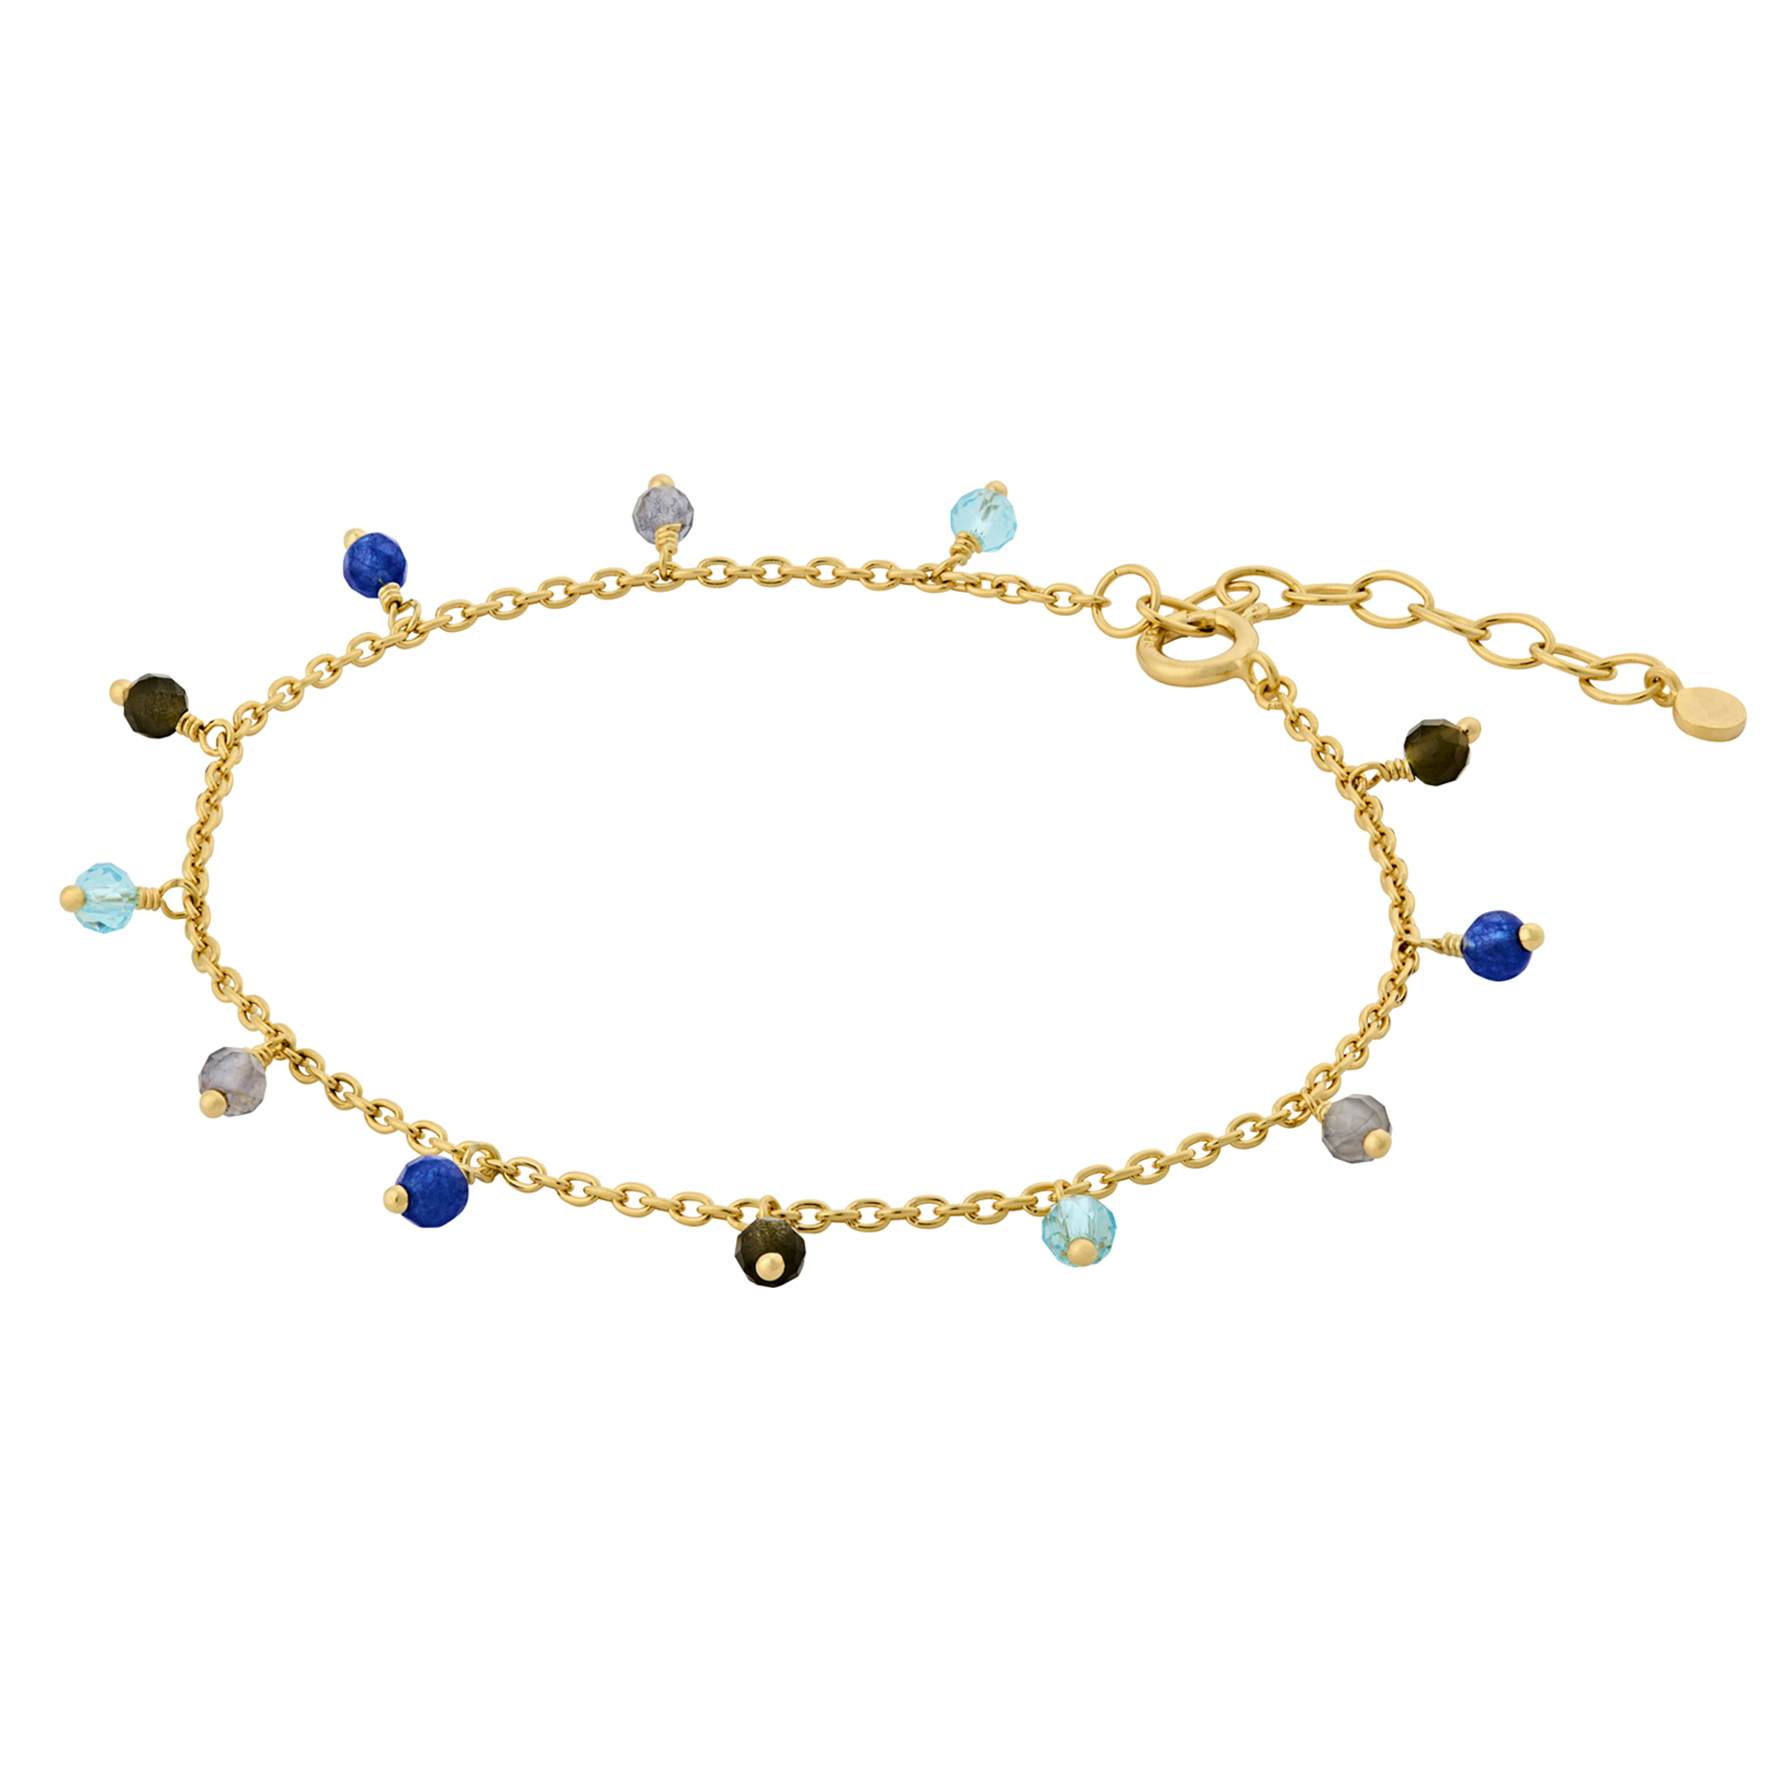 Blue Hour Bracelet from Pernille Corydon in Goldplated-Silver Sterling 925